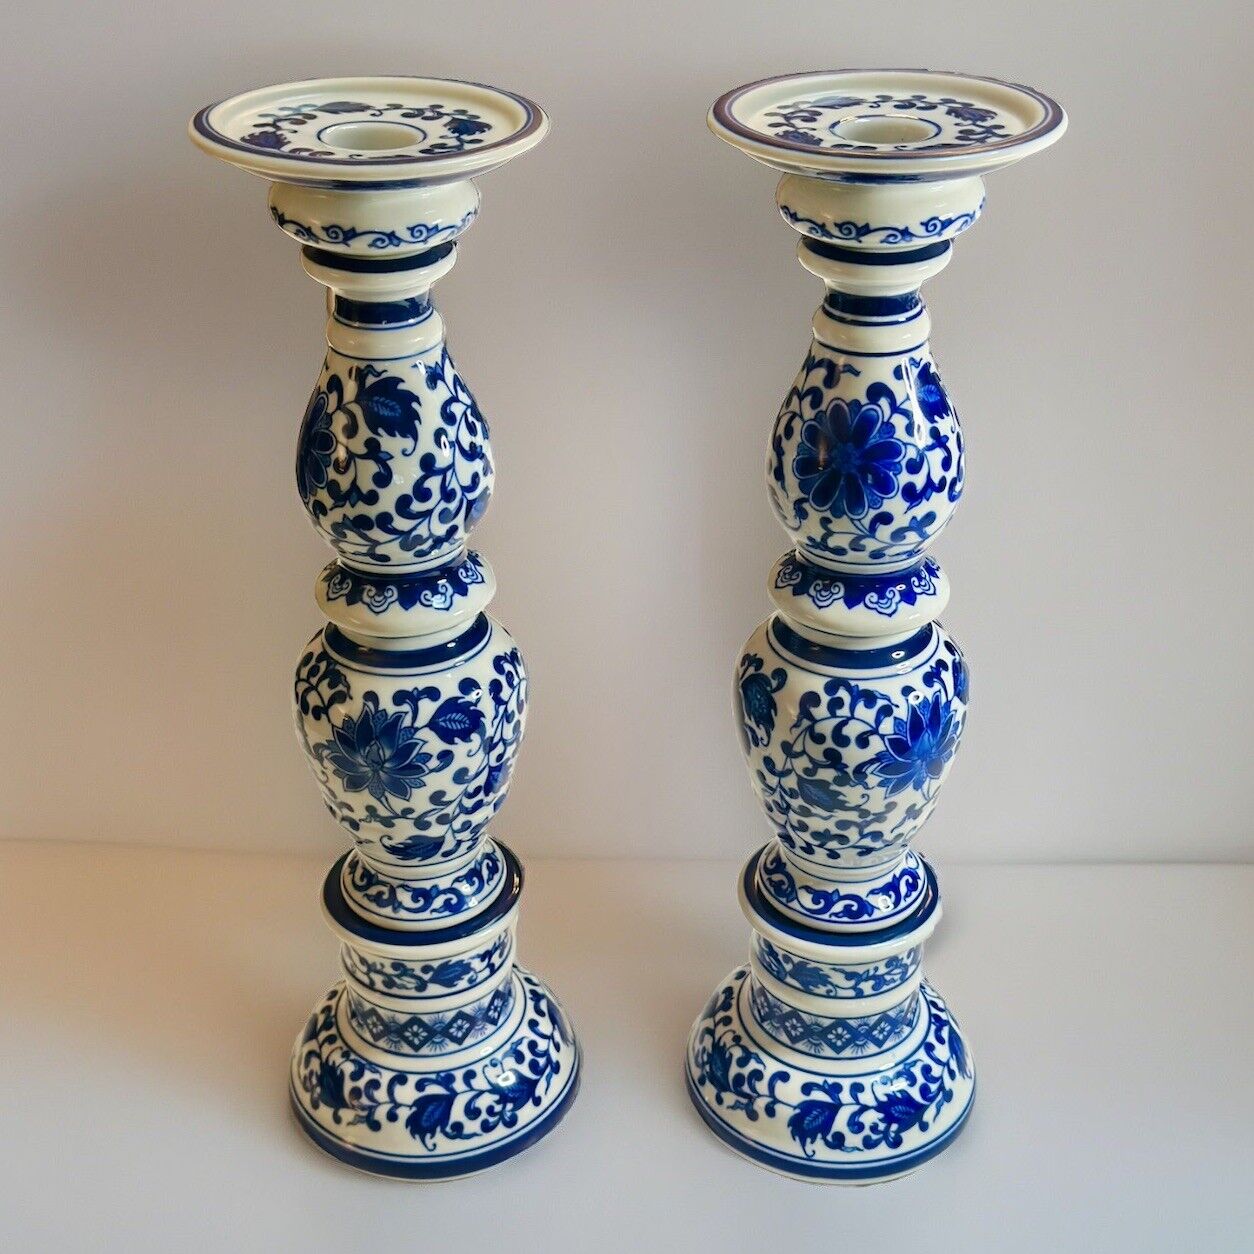 Pair of Bombay Blue and White Chinoiserie Taper Candlestick Holders. Porcelain